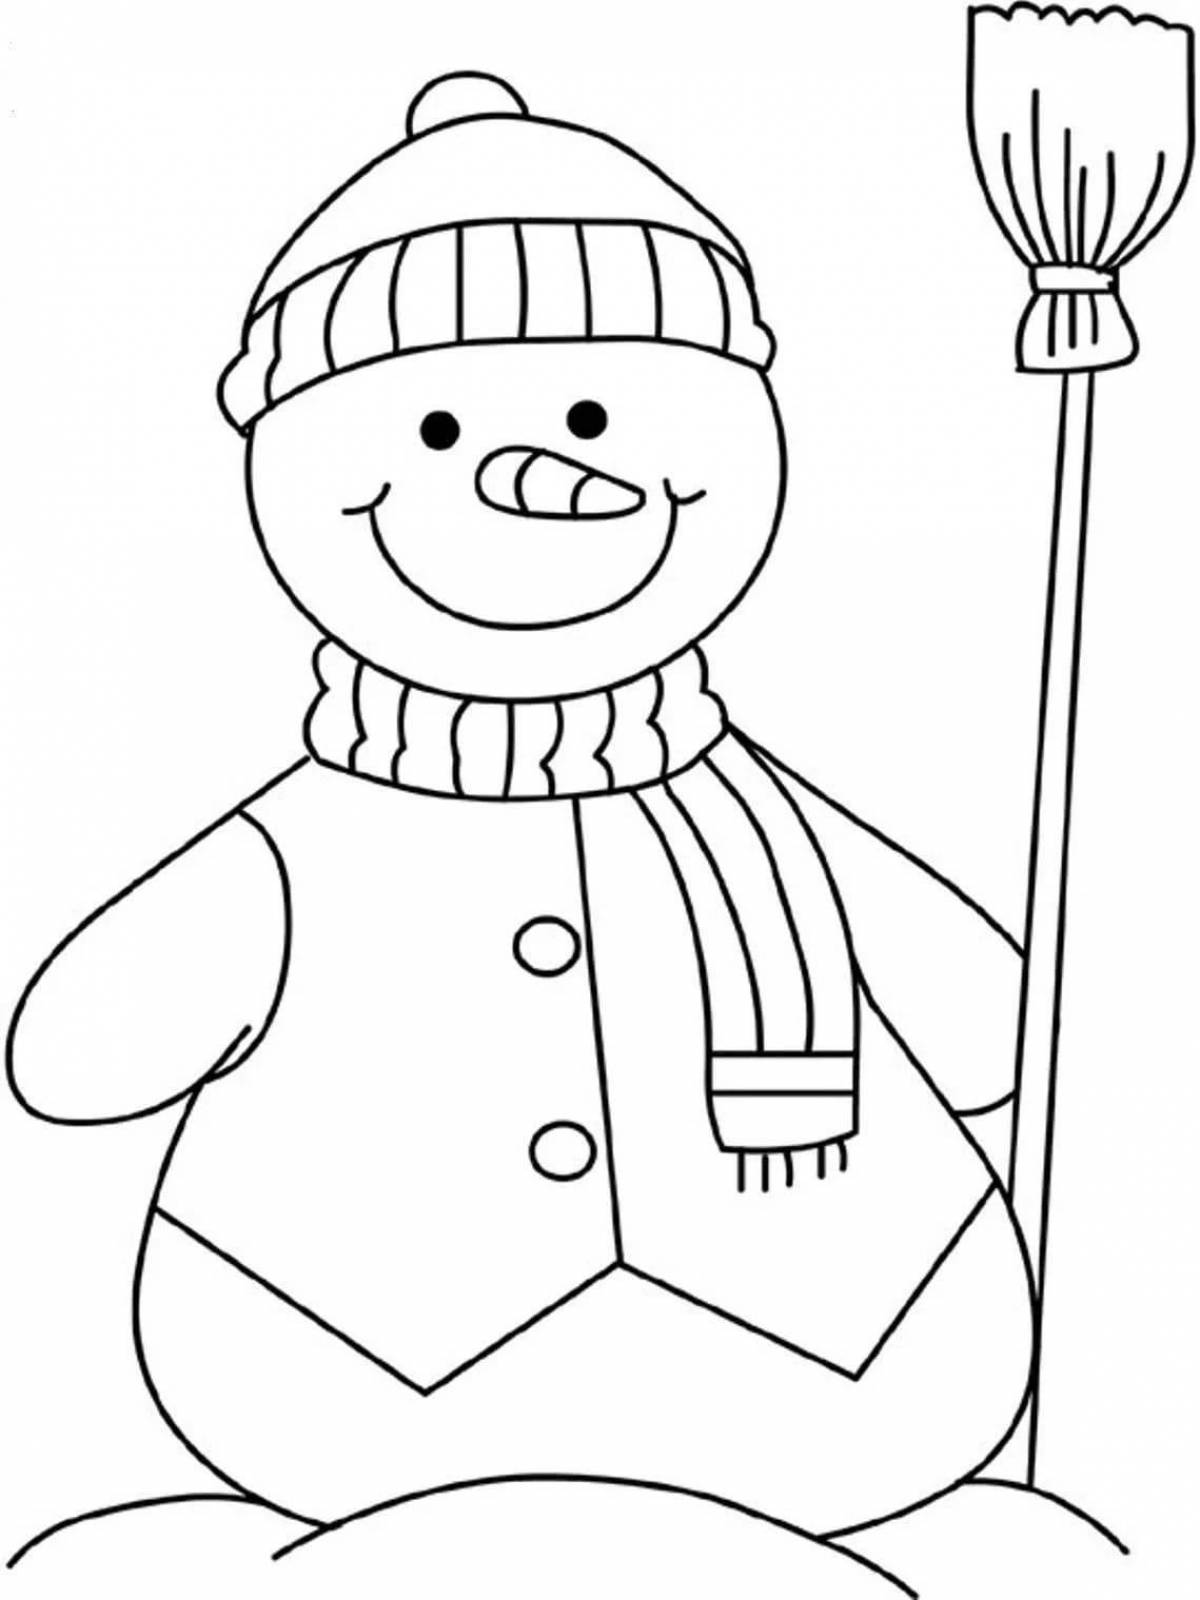 Coloring snowman playtime